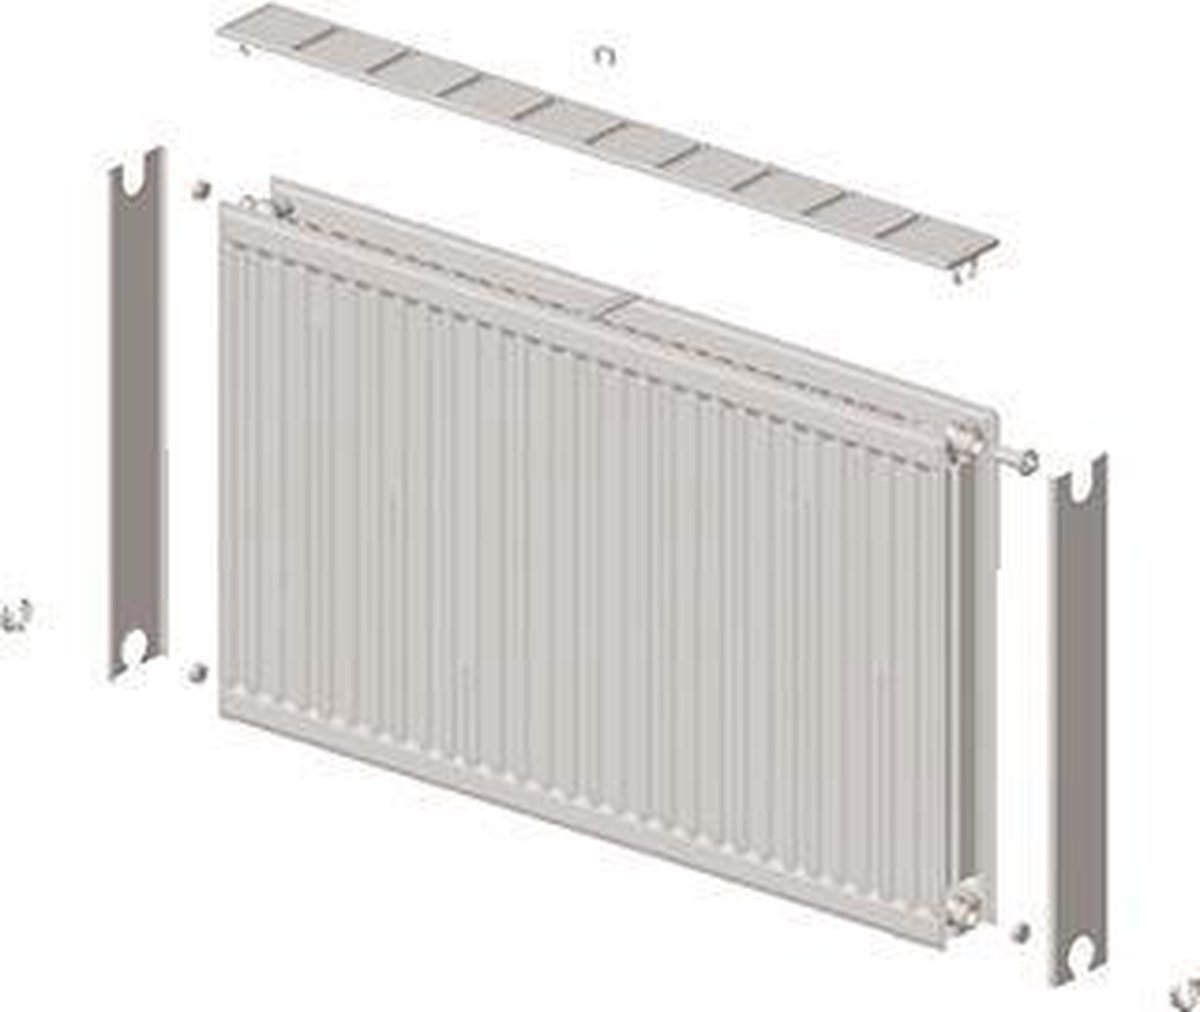 Stelrad paneelradiator Novello, staal, wit, (hxlxd) 700x700x100mm, 22